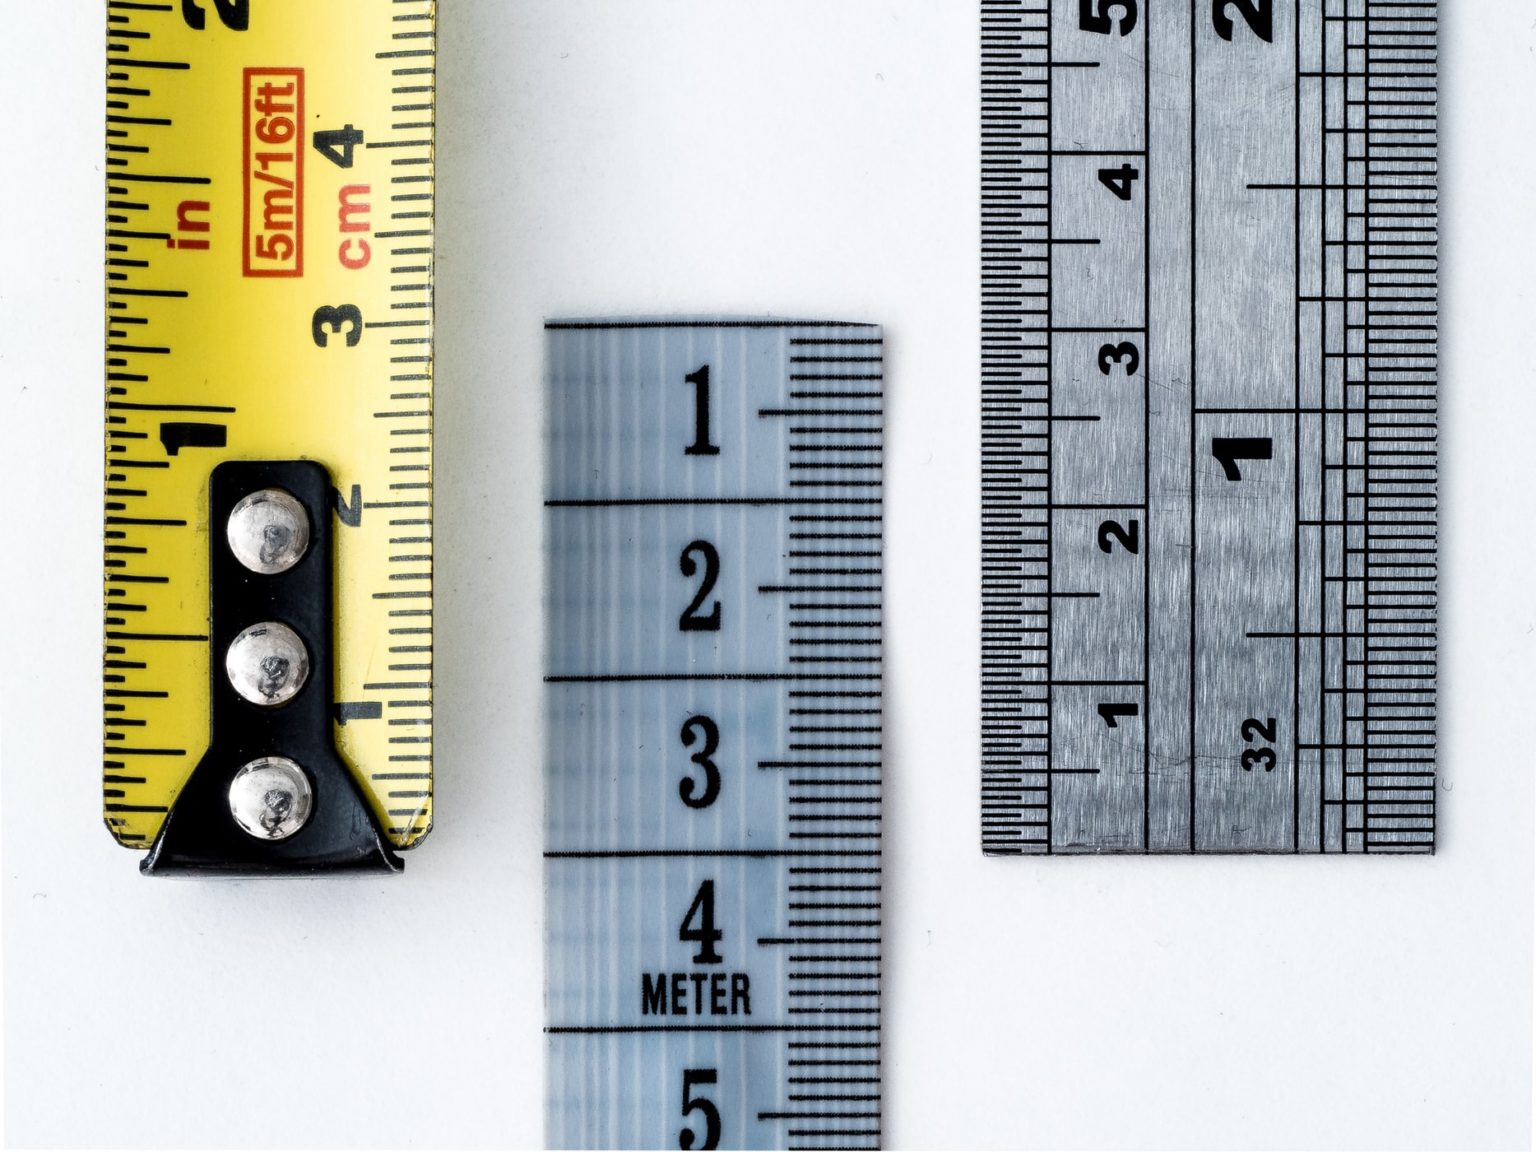 to-know-the-cost-of-something-learn-how-to-measure-it